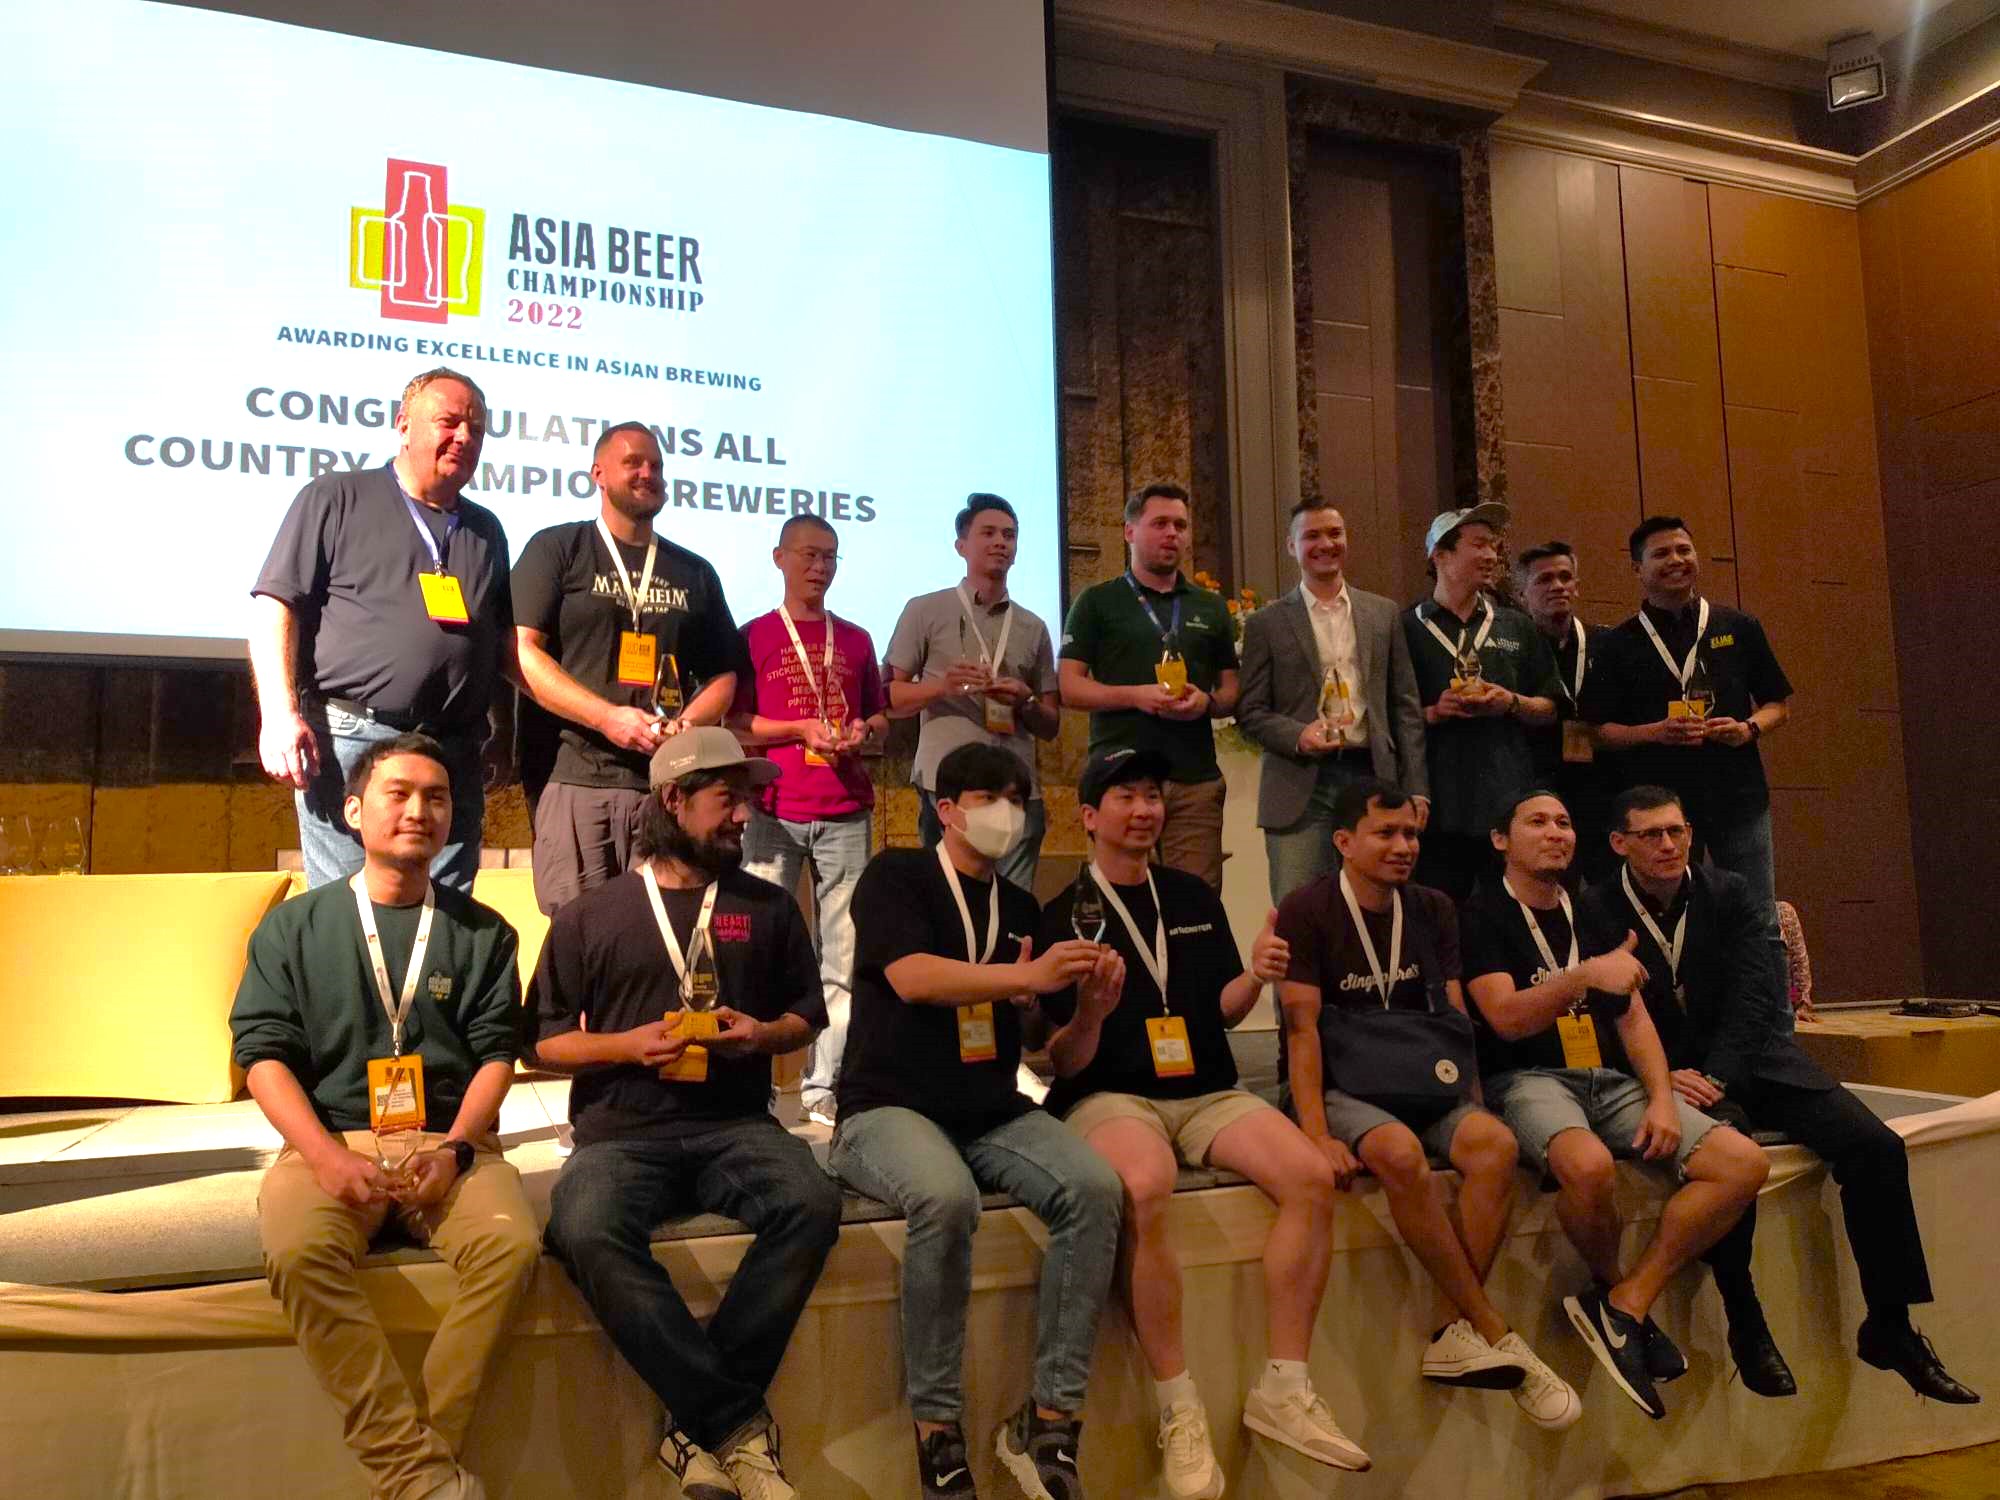 Winners of Asia Beer Championships 2022